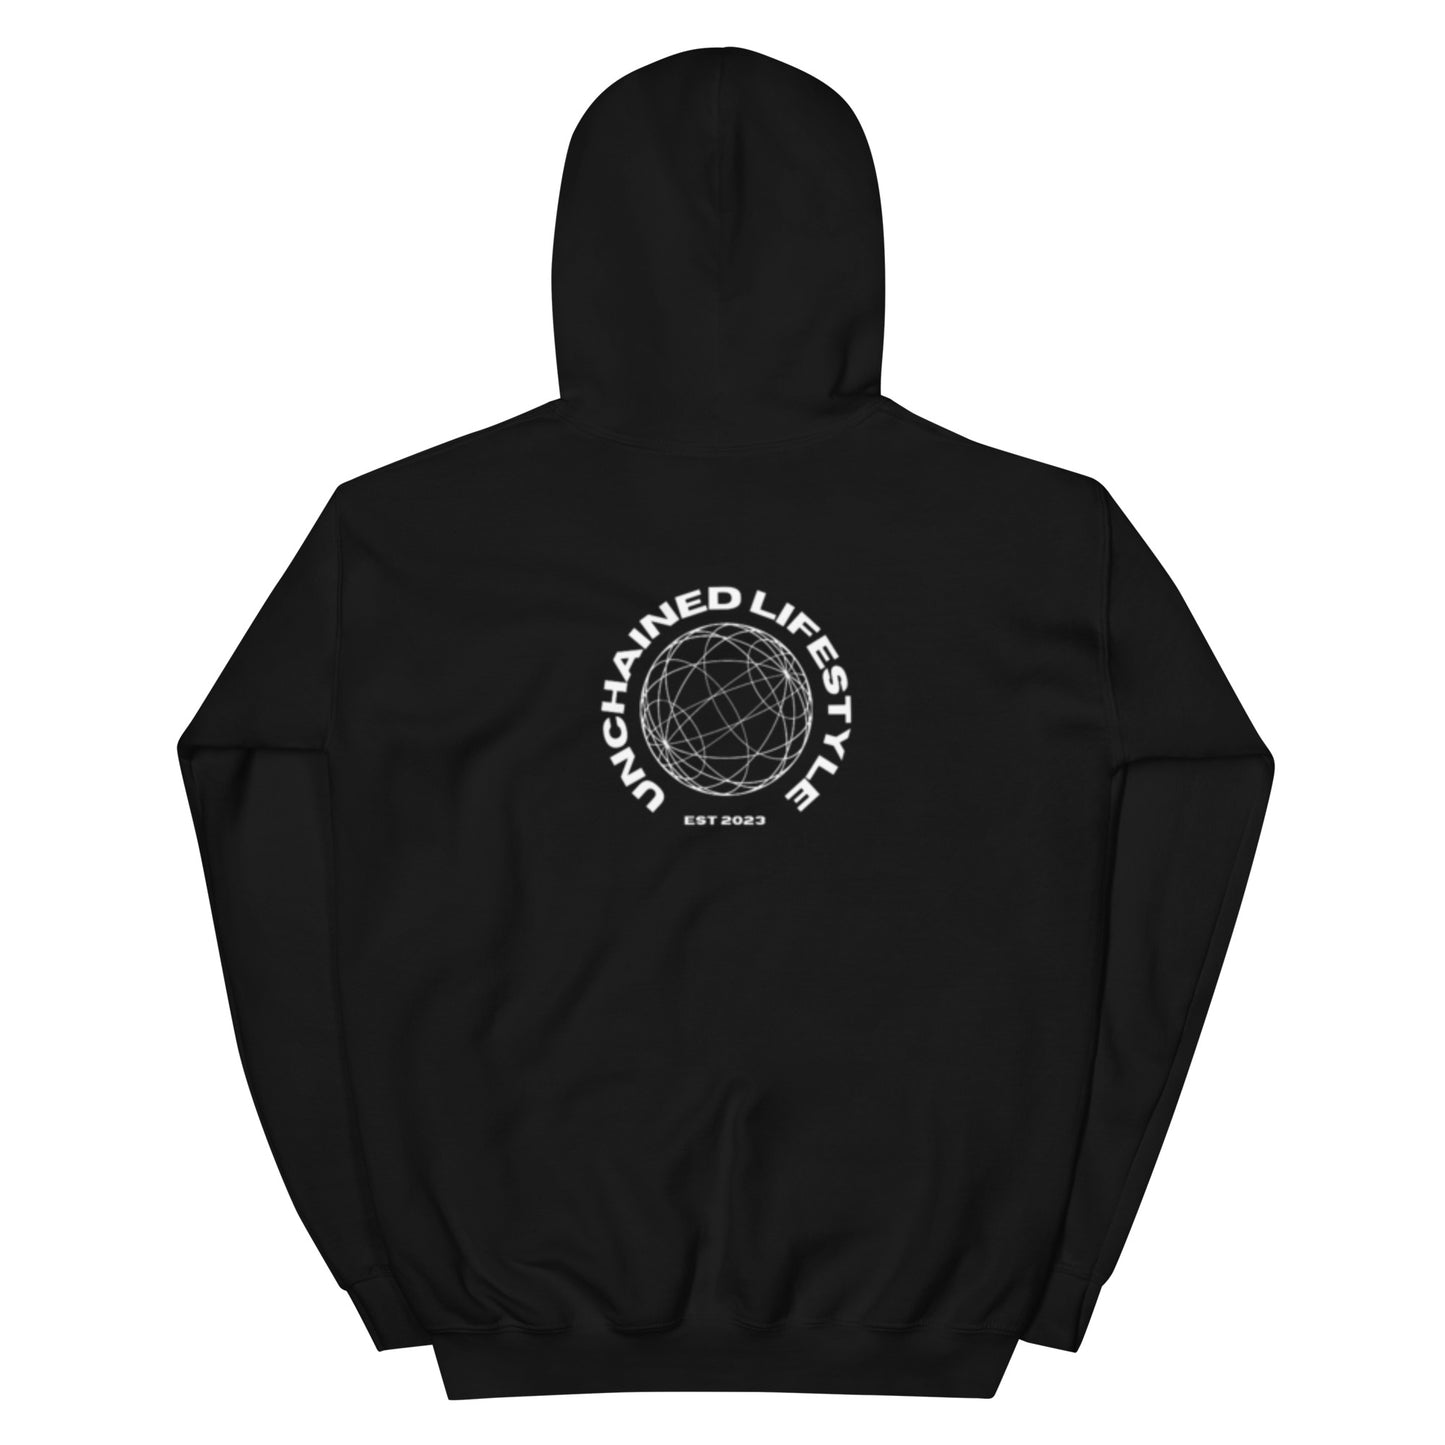 unchained lifestyle dead roses hoodie